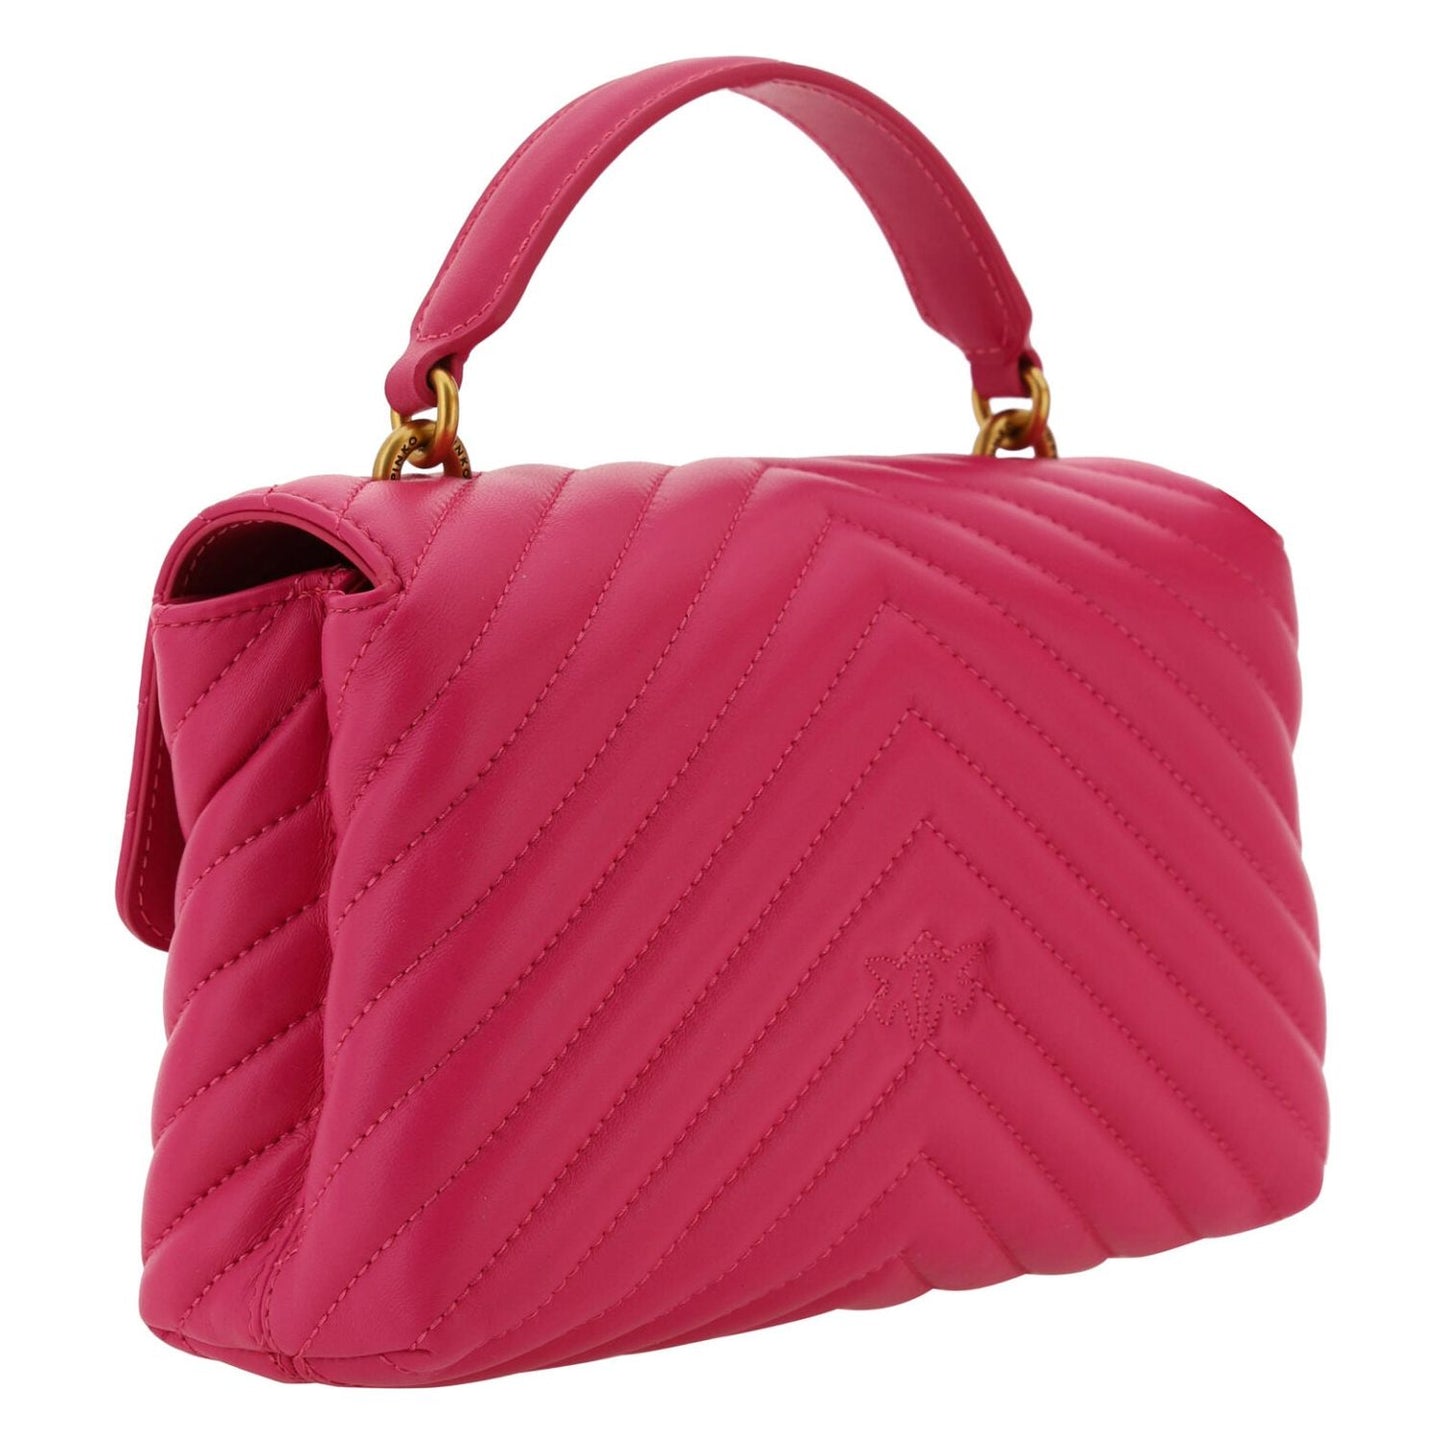 PINKO Chic Pink Quilted Leather Mini Handbag pink-calf-leather-love-lady-mini-handbag-1